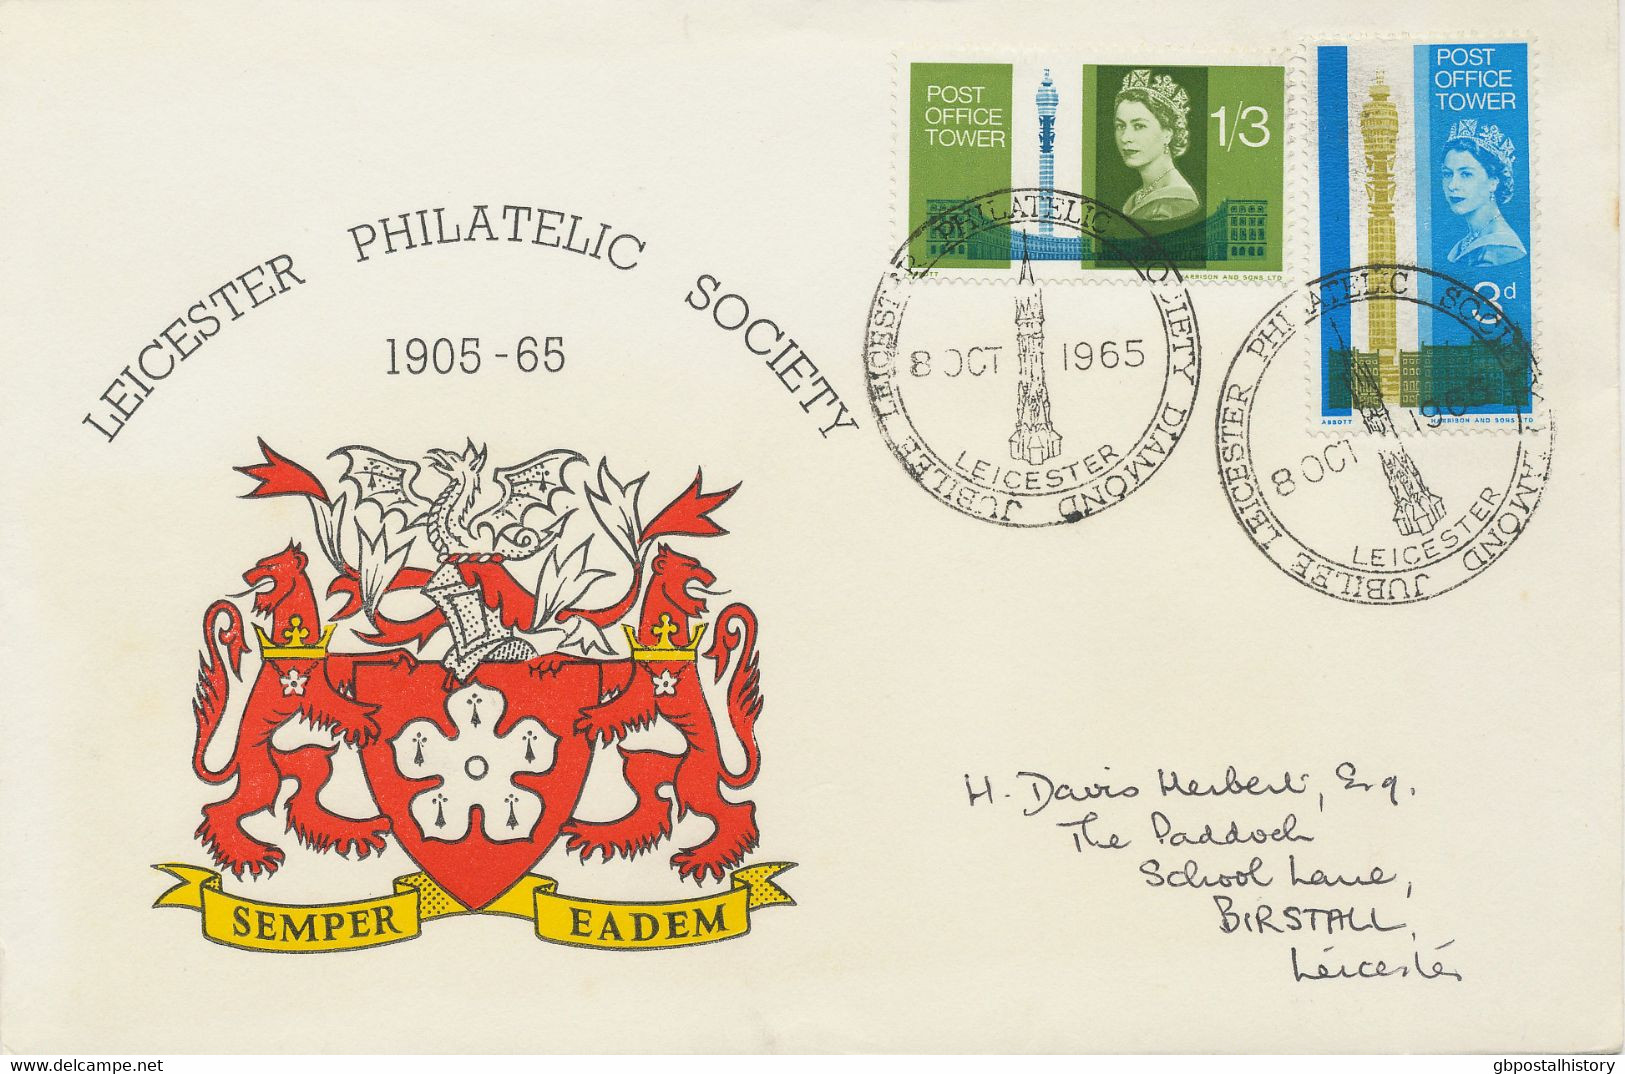 GB SPECIAL EVENT POSTMARK 1965 LEICESTER PHILATELIC SOCIETY DIAMOND JUBILEE LEICESTER - Extremly Rare FDC Postmark, R! - 1952-71 Ediciones Pre-Decimales